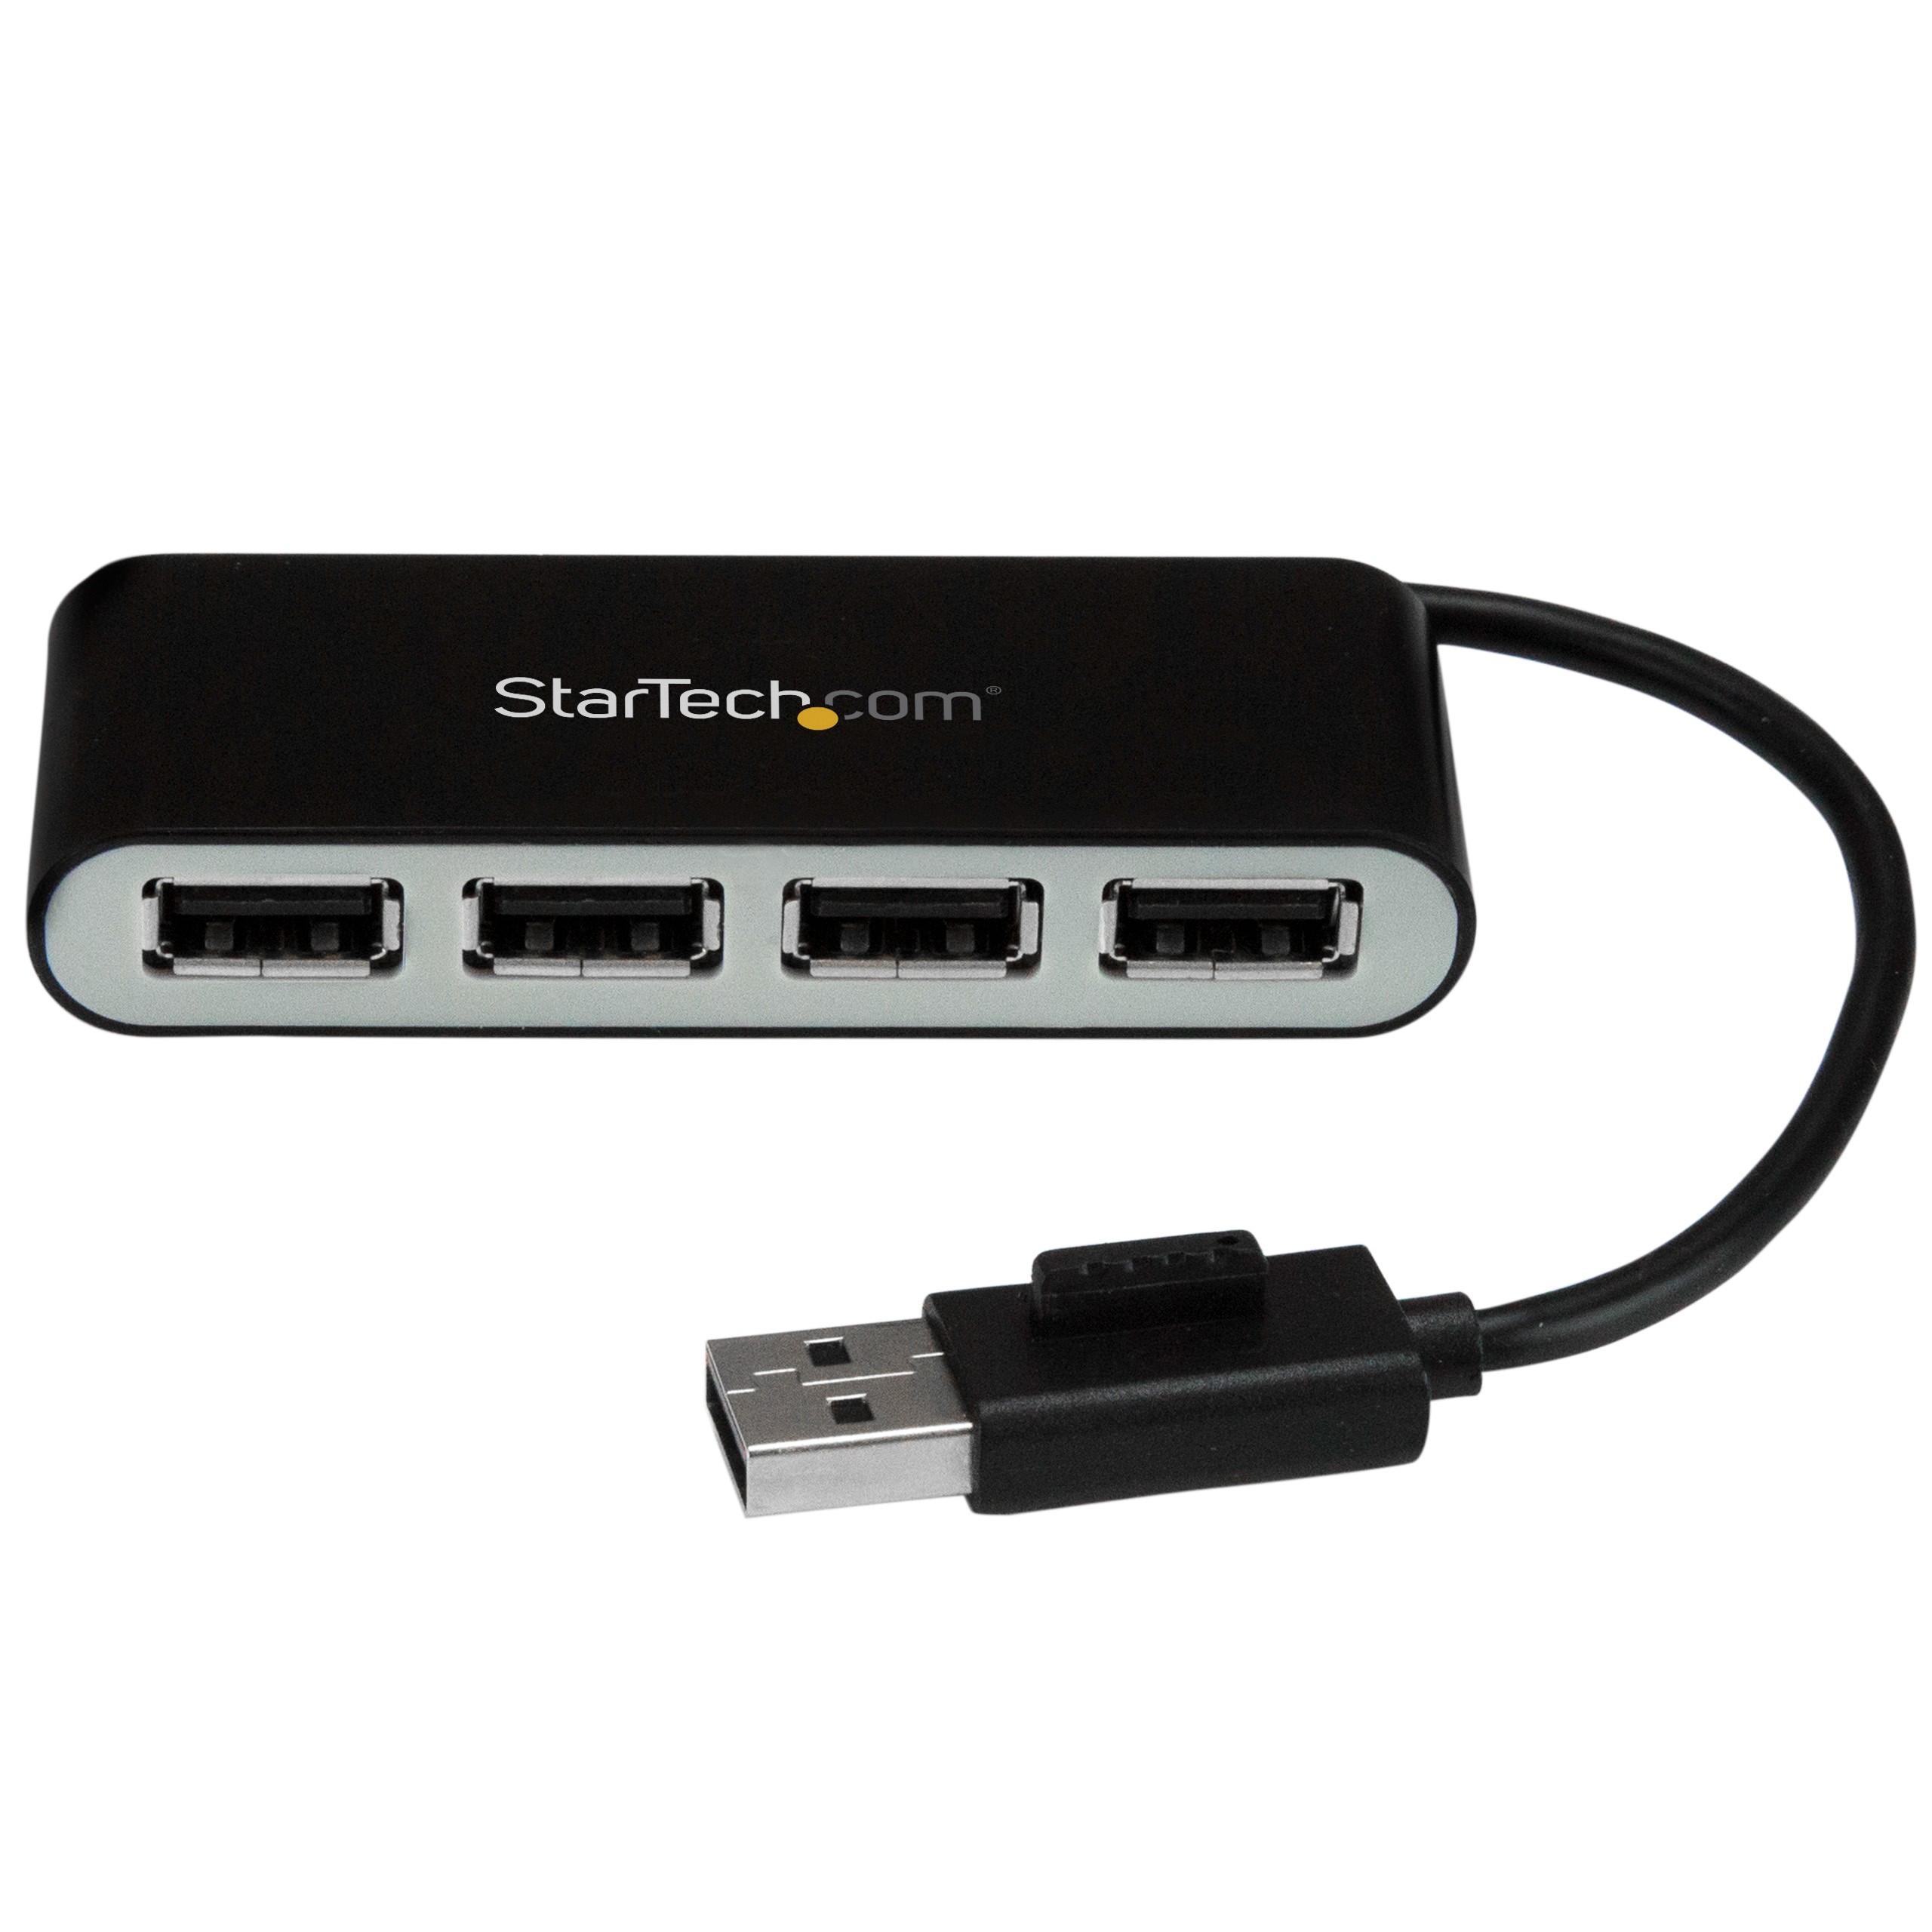 Startech ST4200MINI2 4-Port Portable USB 2.0 Hub with Built in Cable, Black